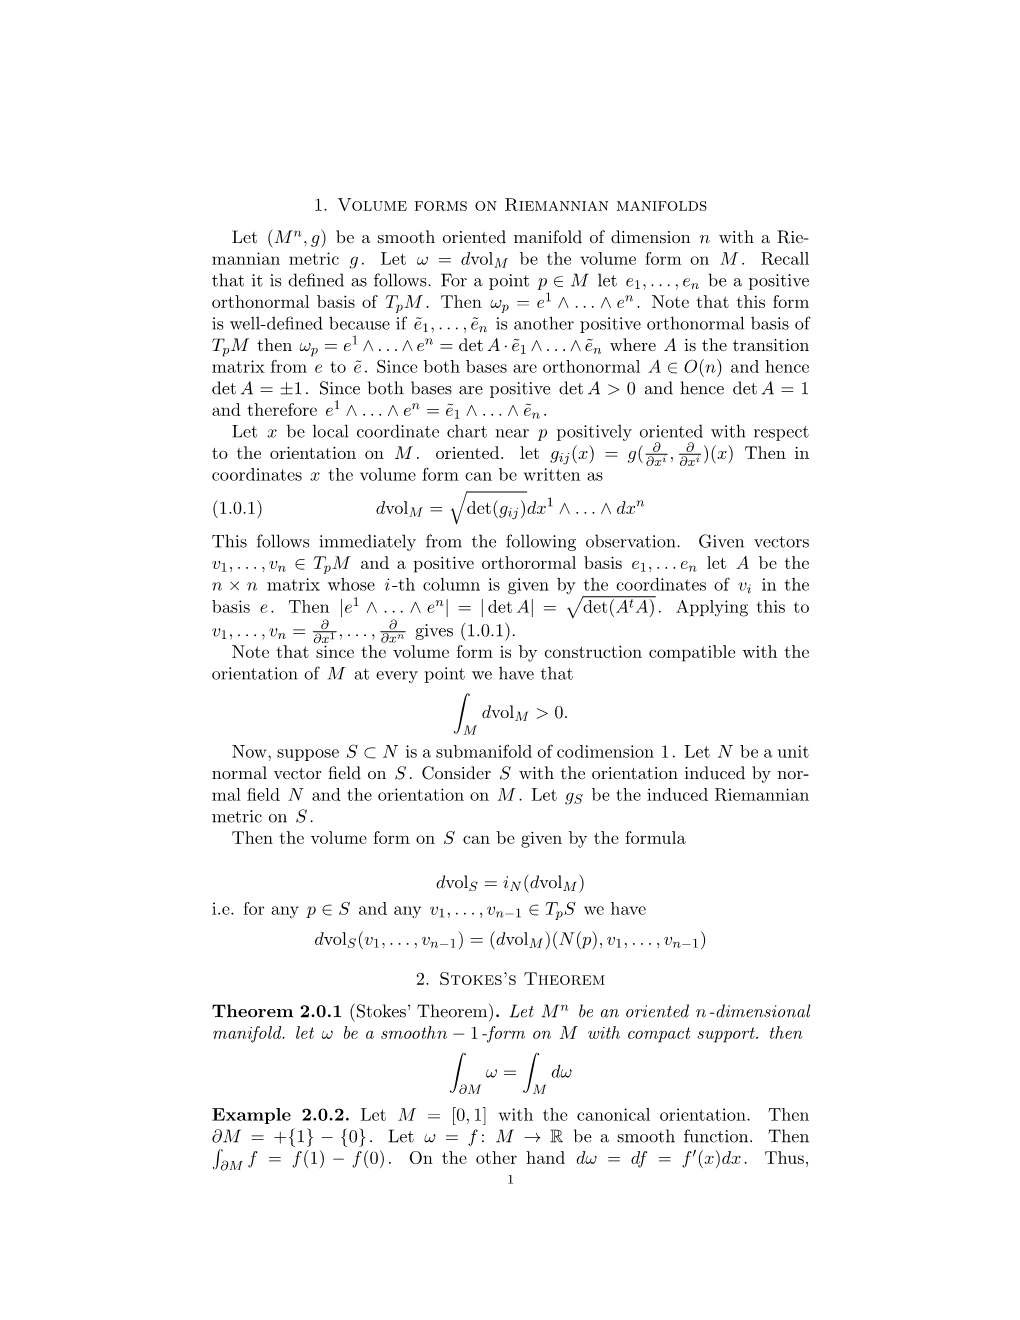 1. Volume Forms on Riemannian Manifolds Let (Mn,G) Be a Smooth Oriented Manifold of Dimension N with a Rie- Mannian Metric G. Le